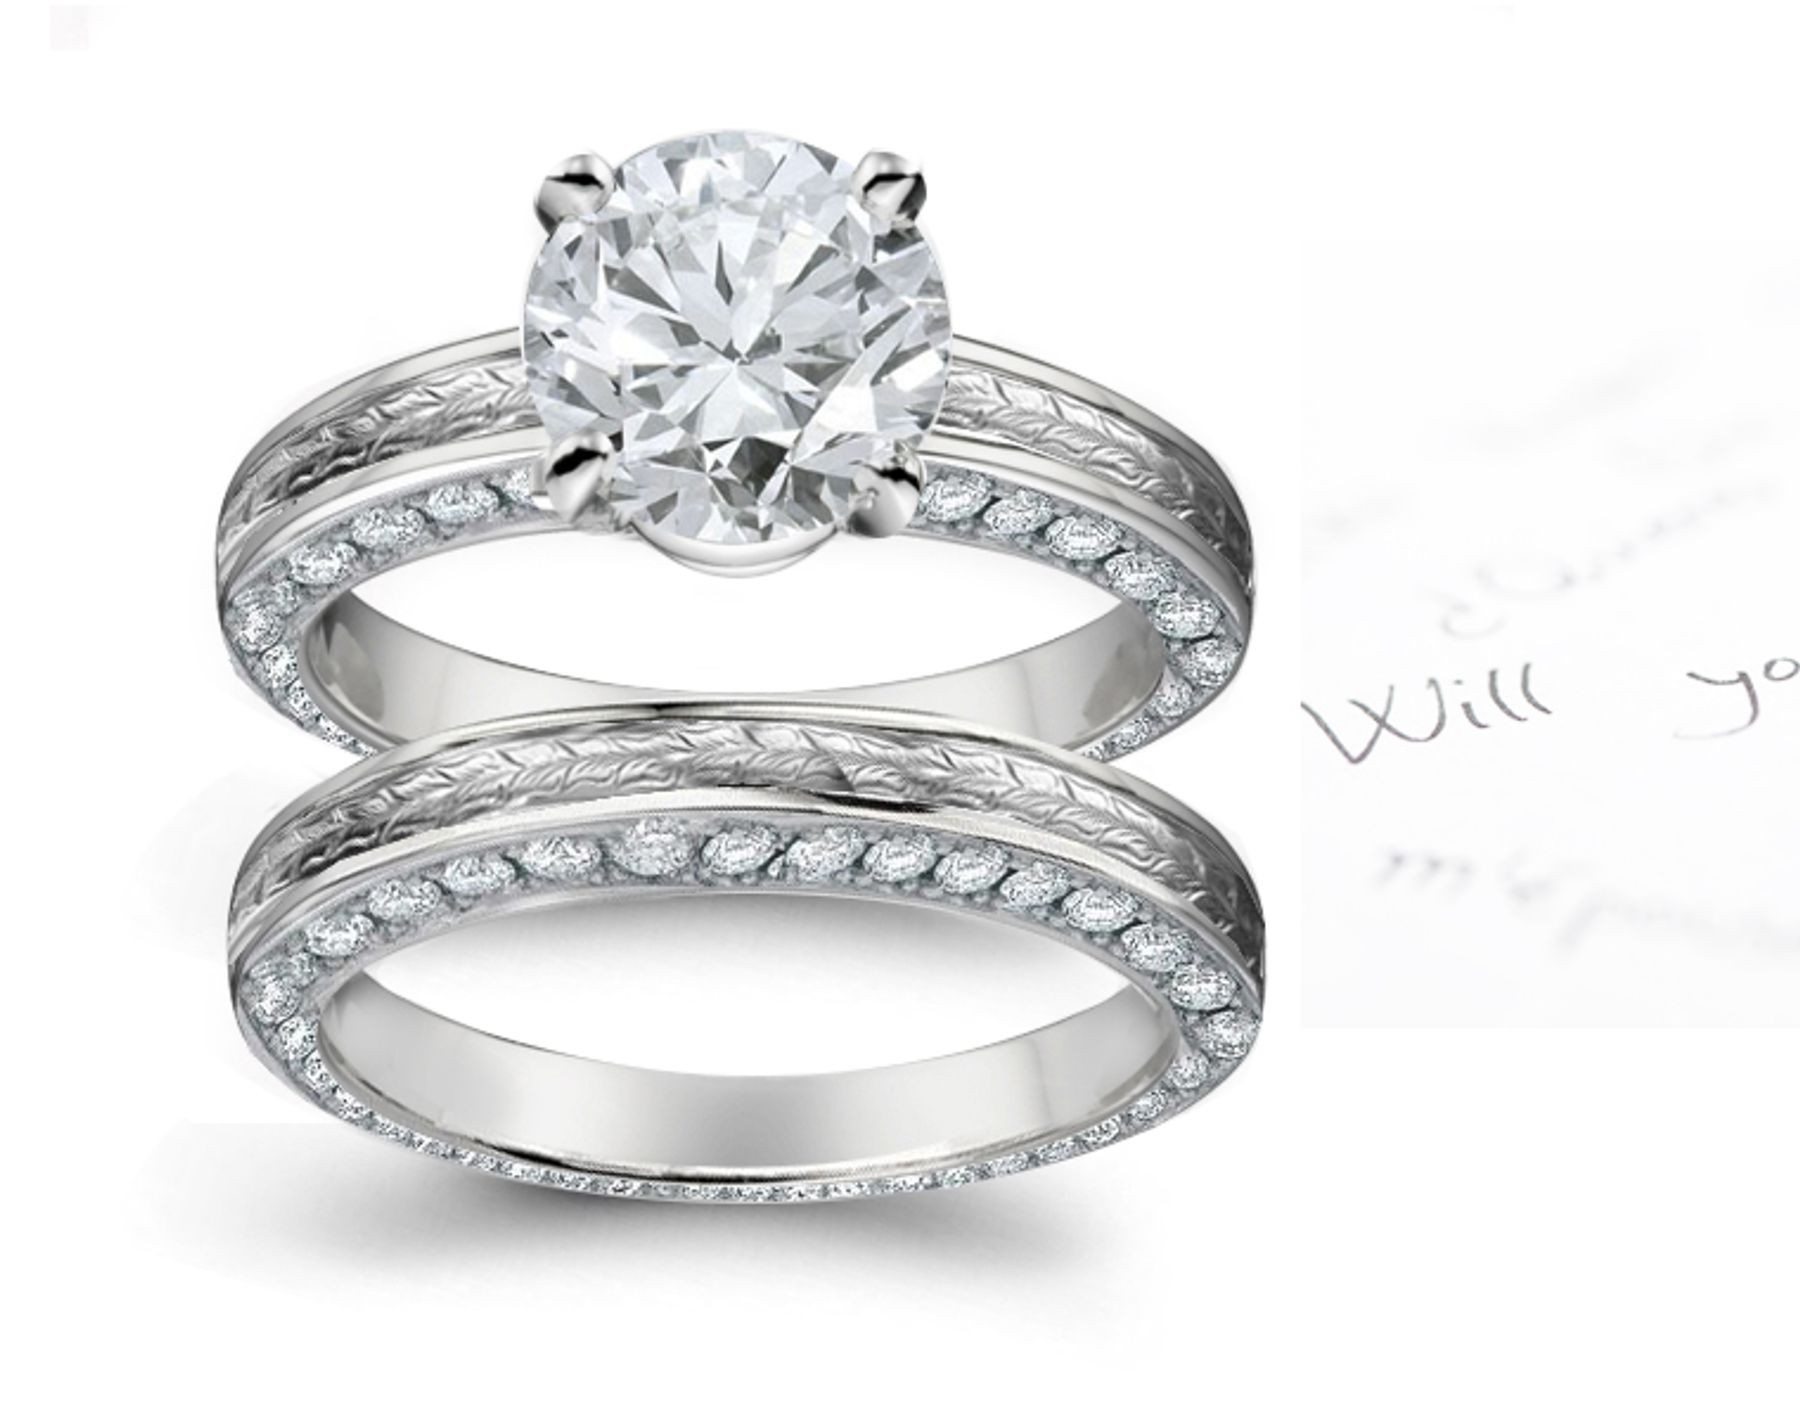 Special Design White Gold, & Diamond Ring with Floral Scrolls & Motifs Shoulders & Diamond Halo Sides